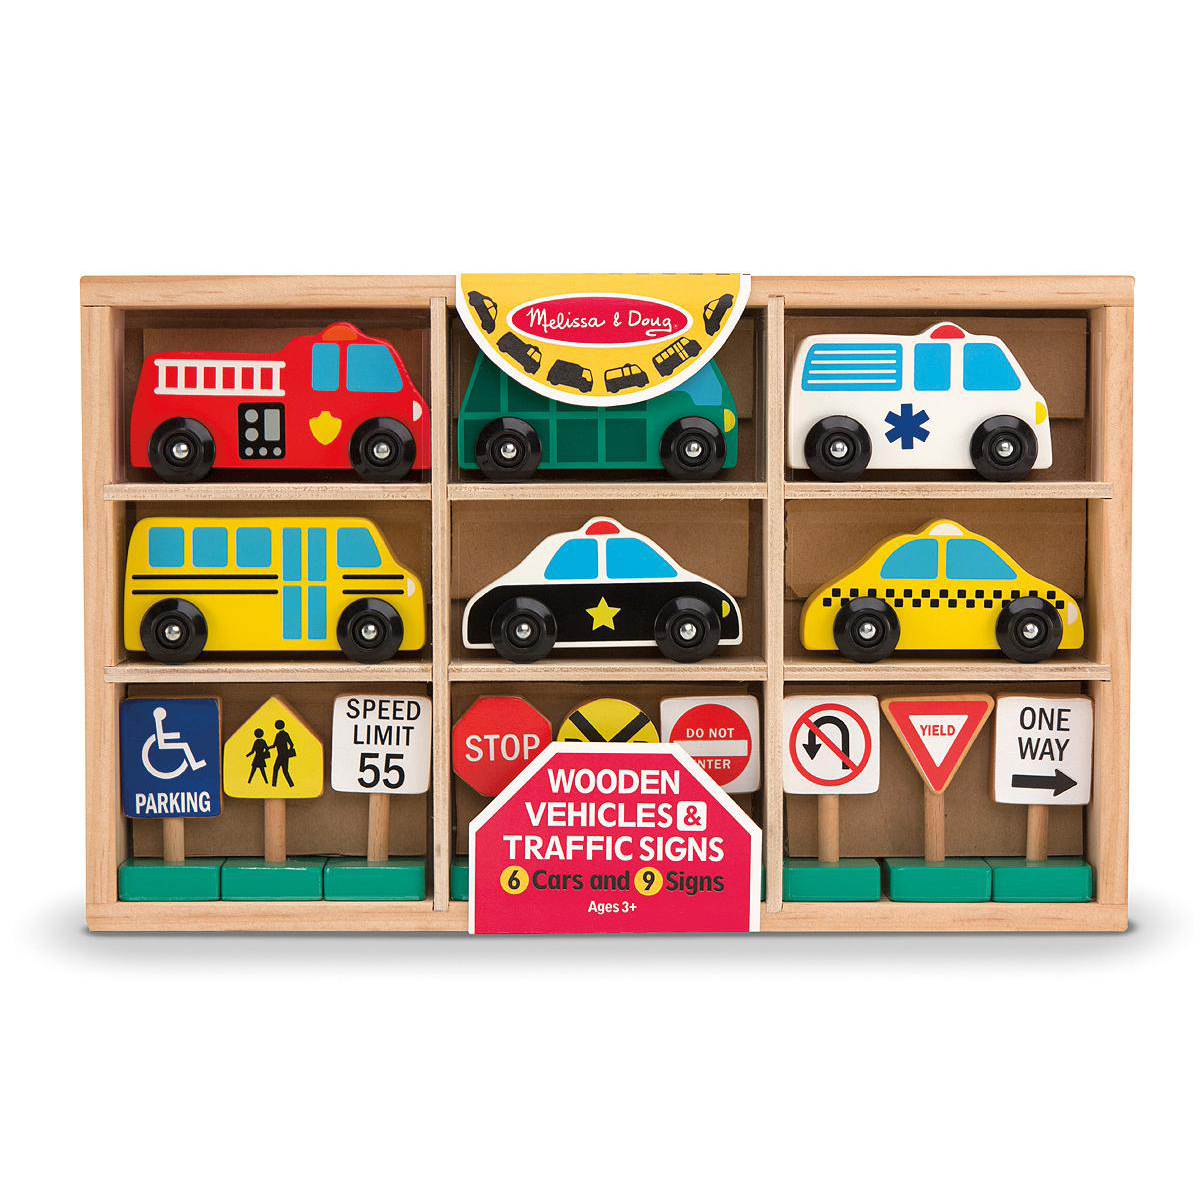  Wooden Vehicles &amp; Traffic Signs 